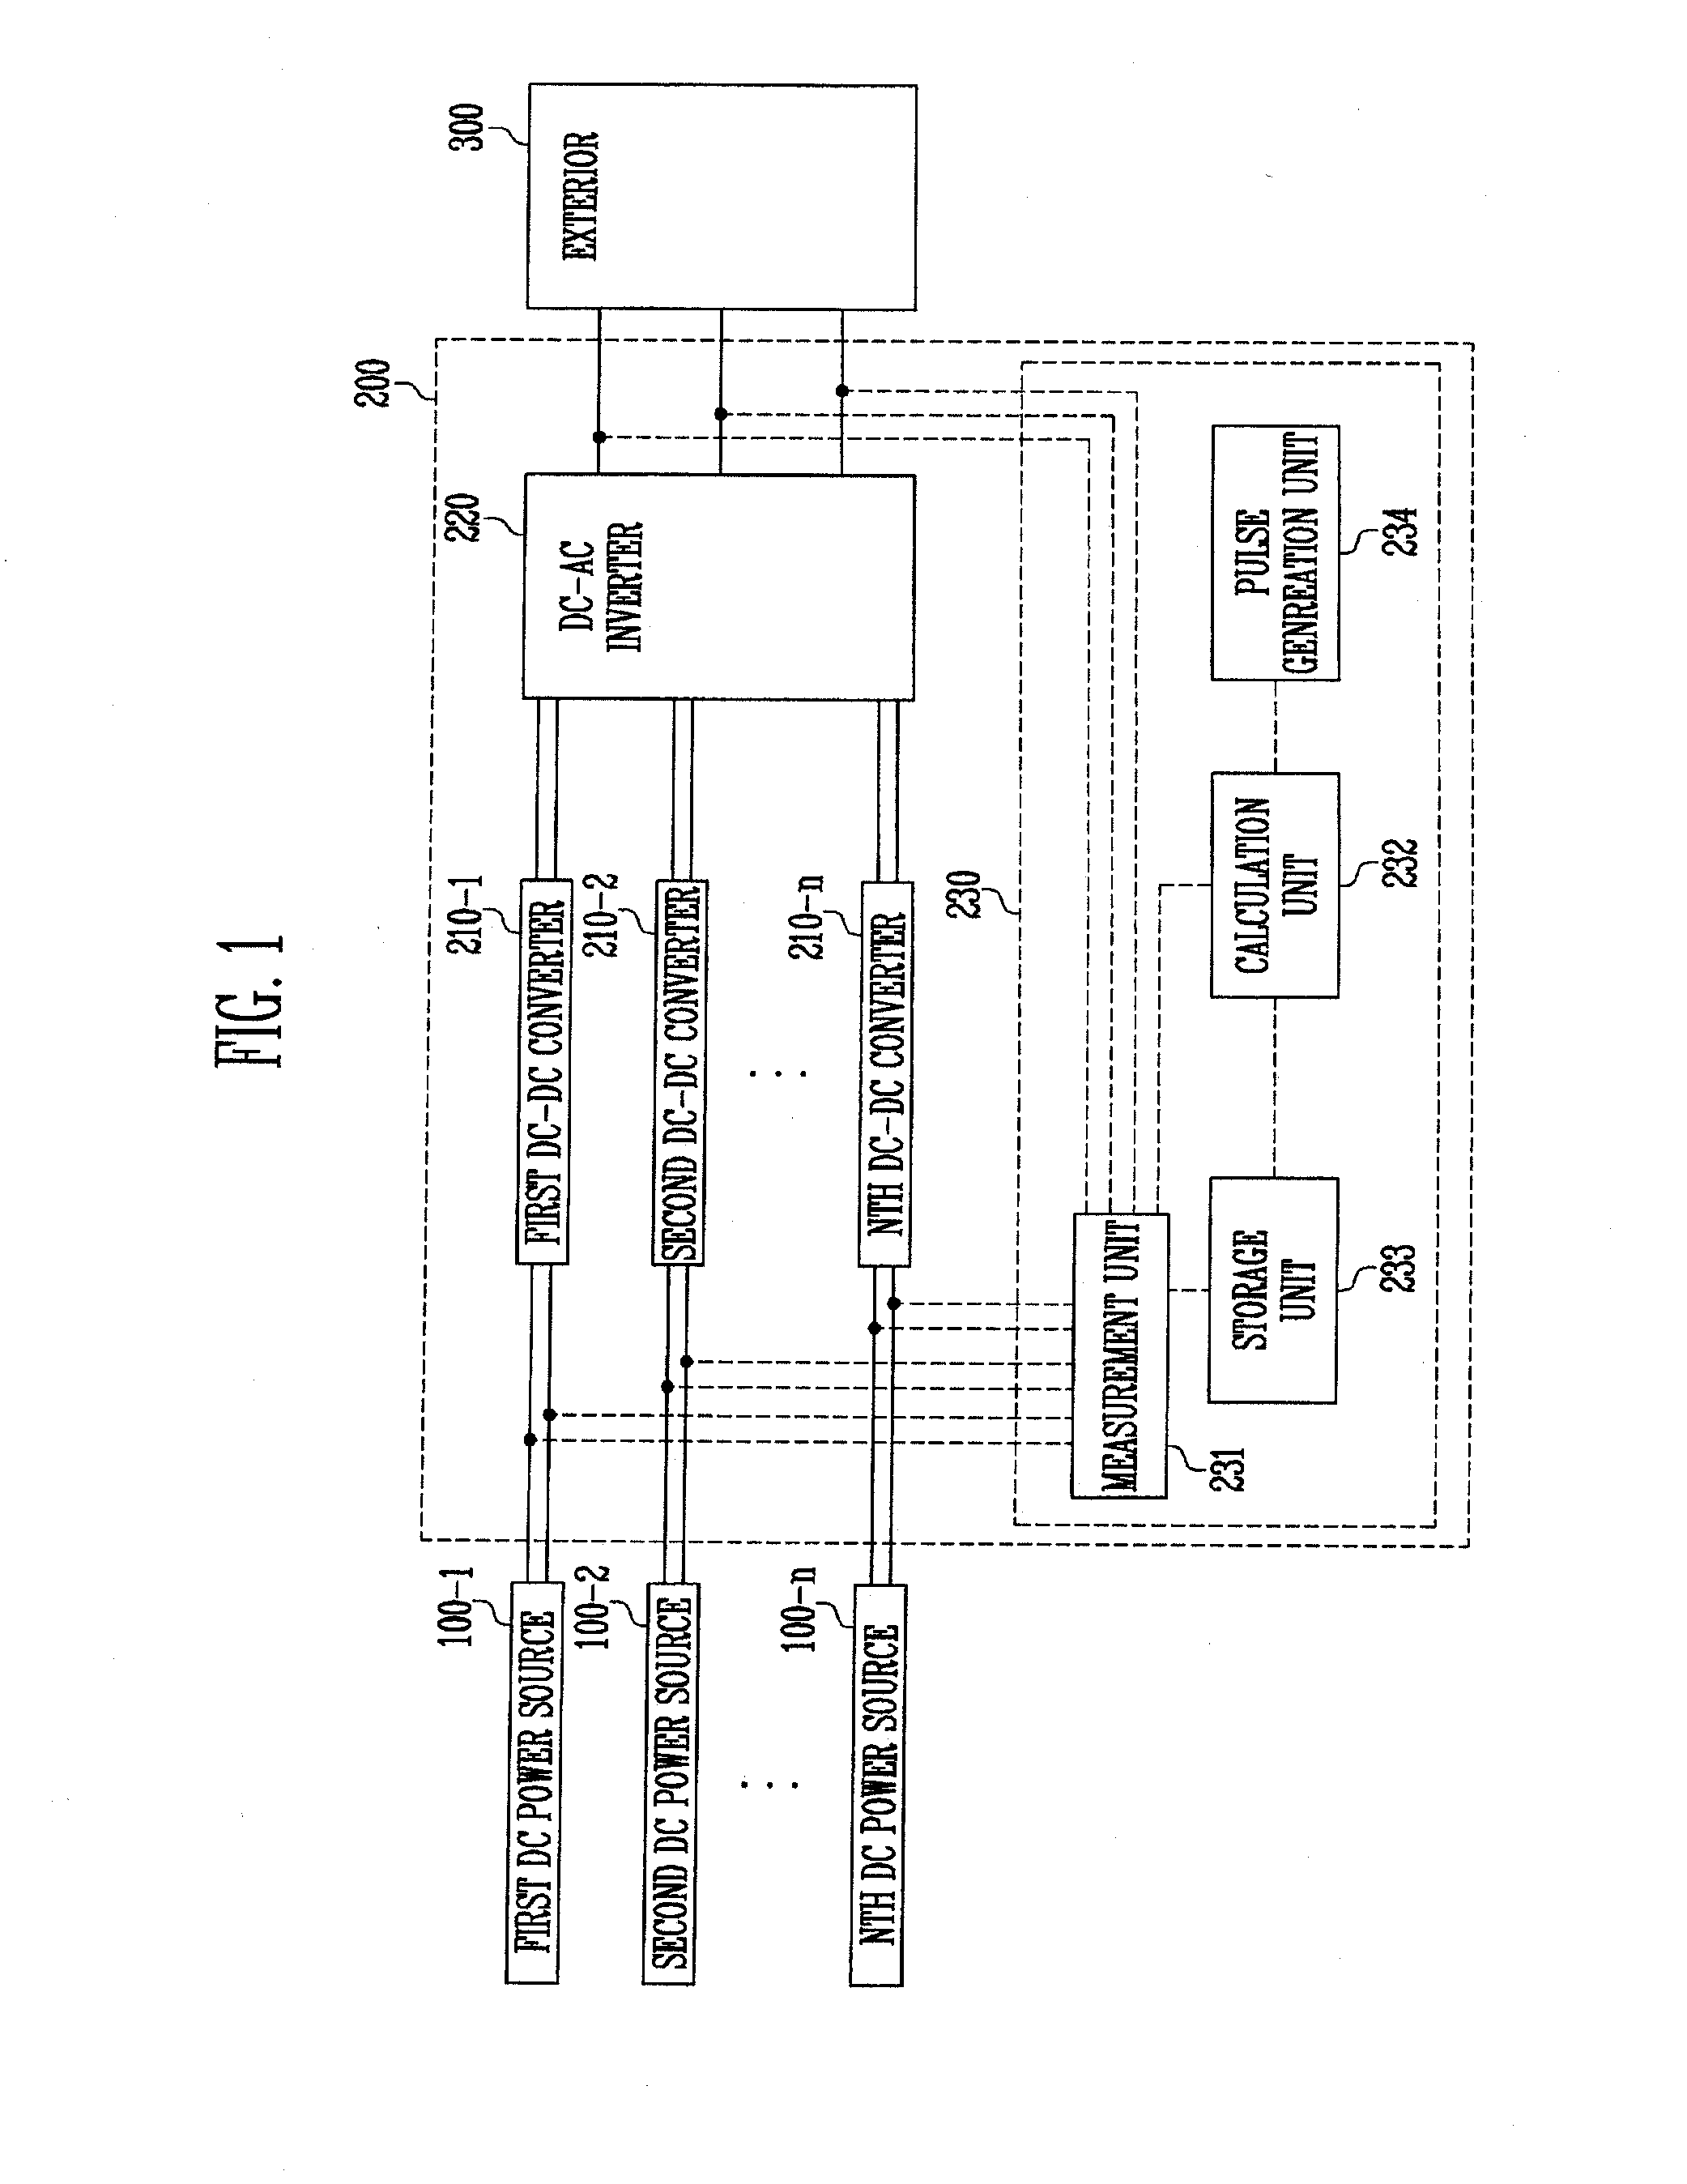 Power conversion device and method of driving the same